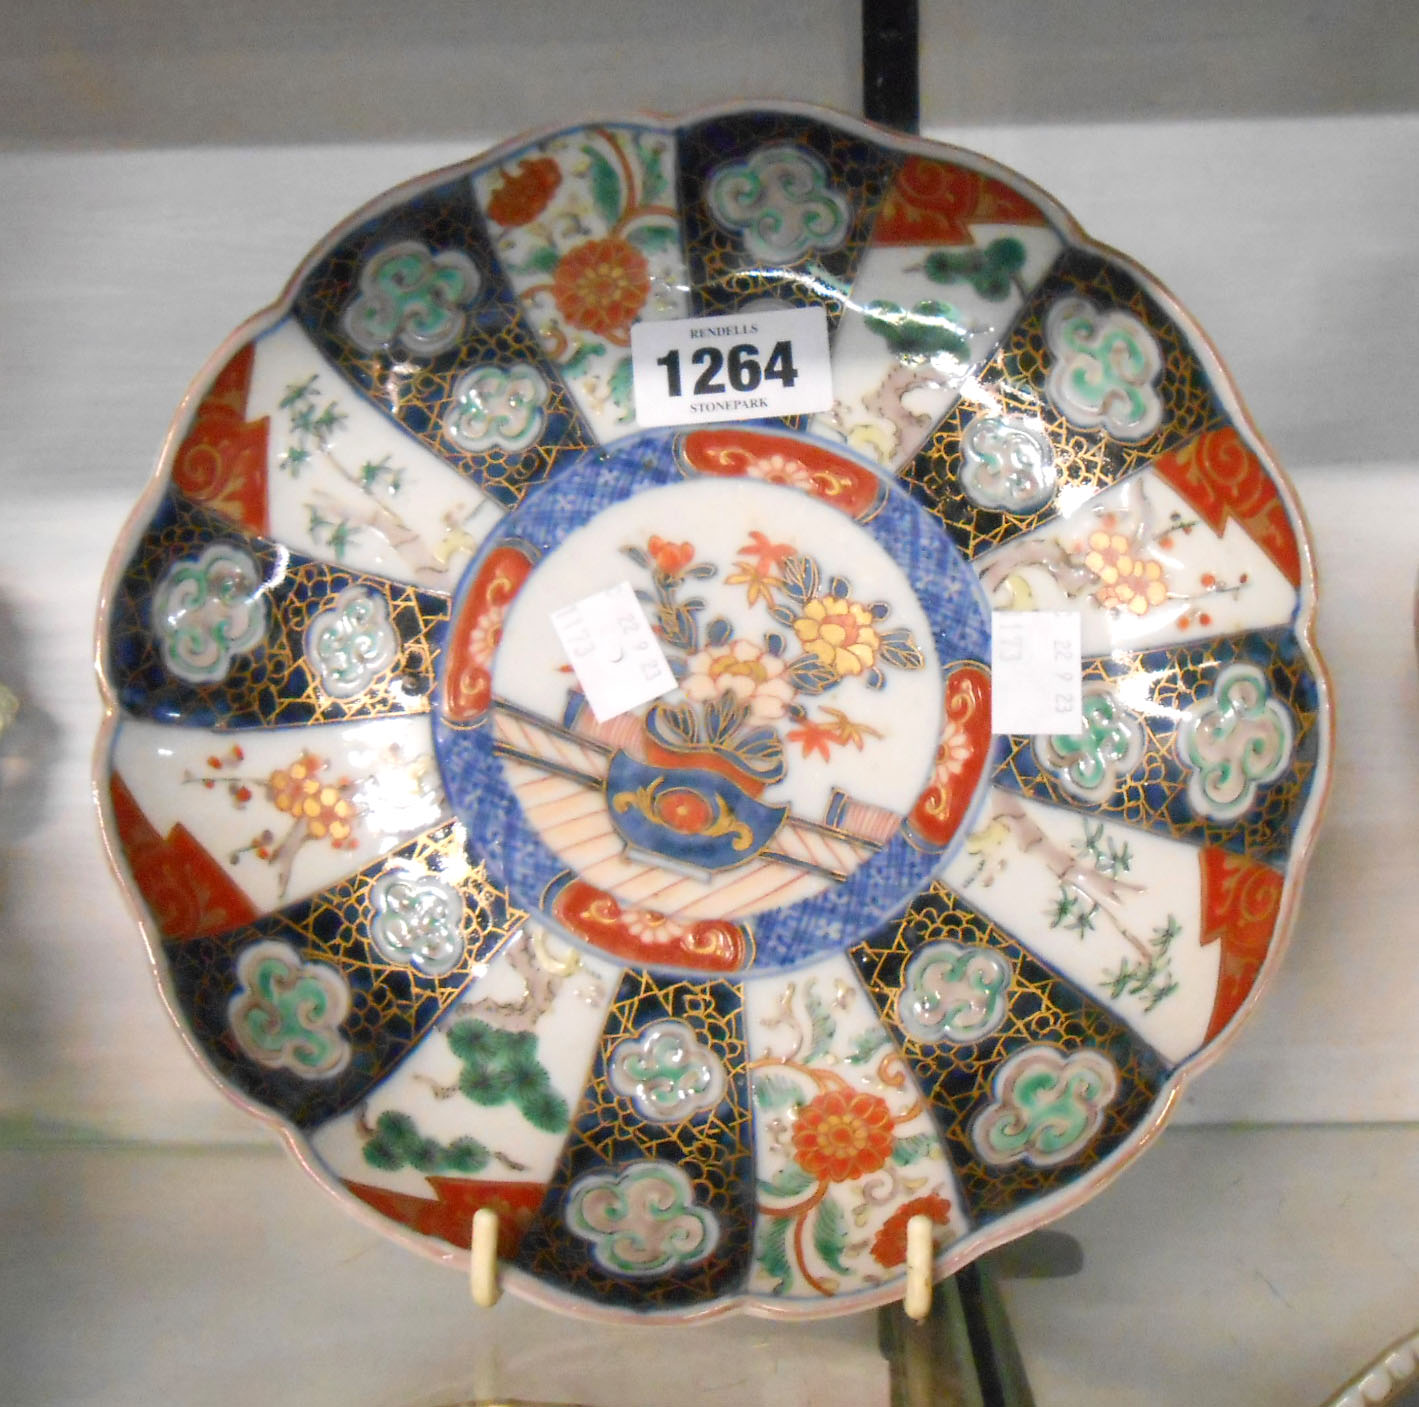 A 19th Century Japanese Imari plate of lobed form with enamelled decoration